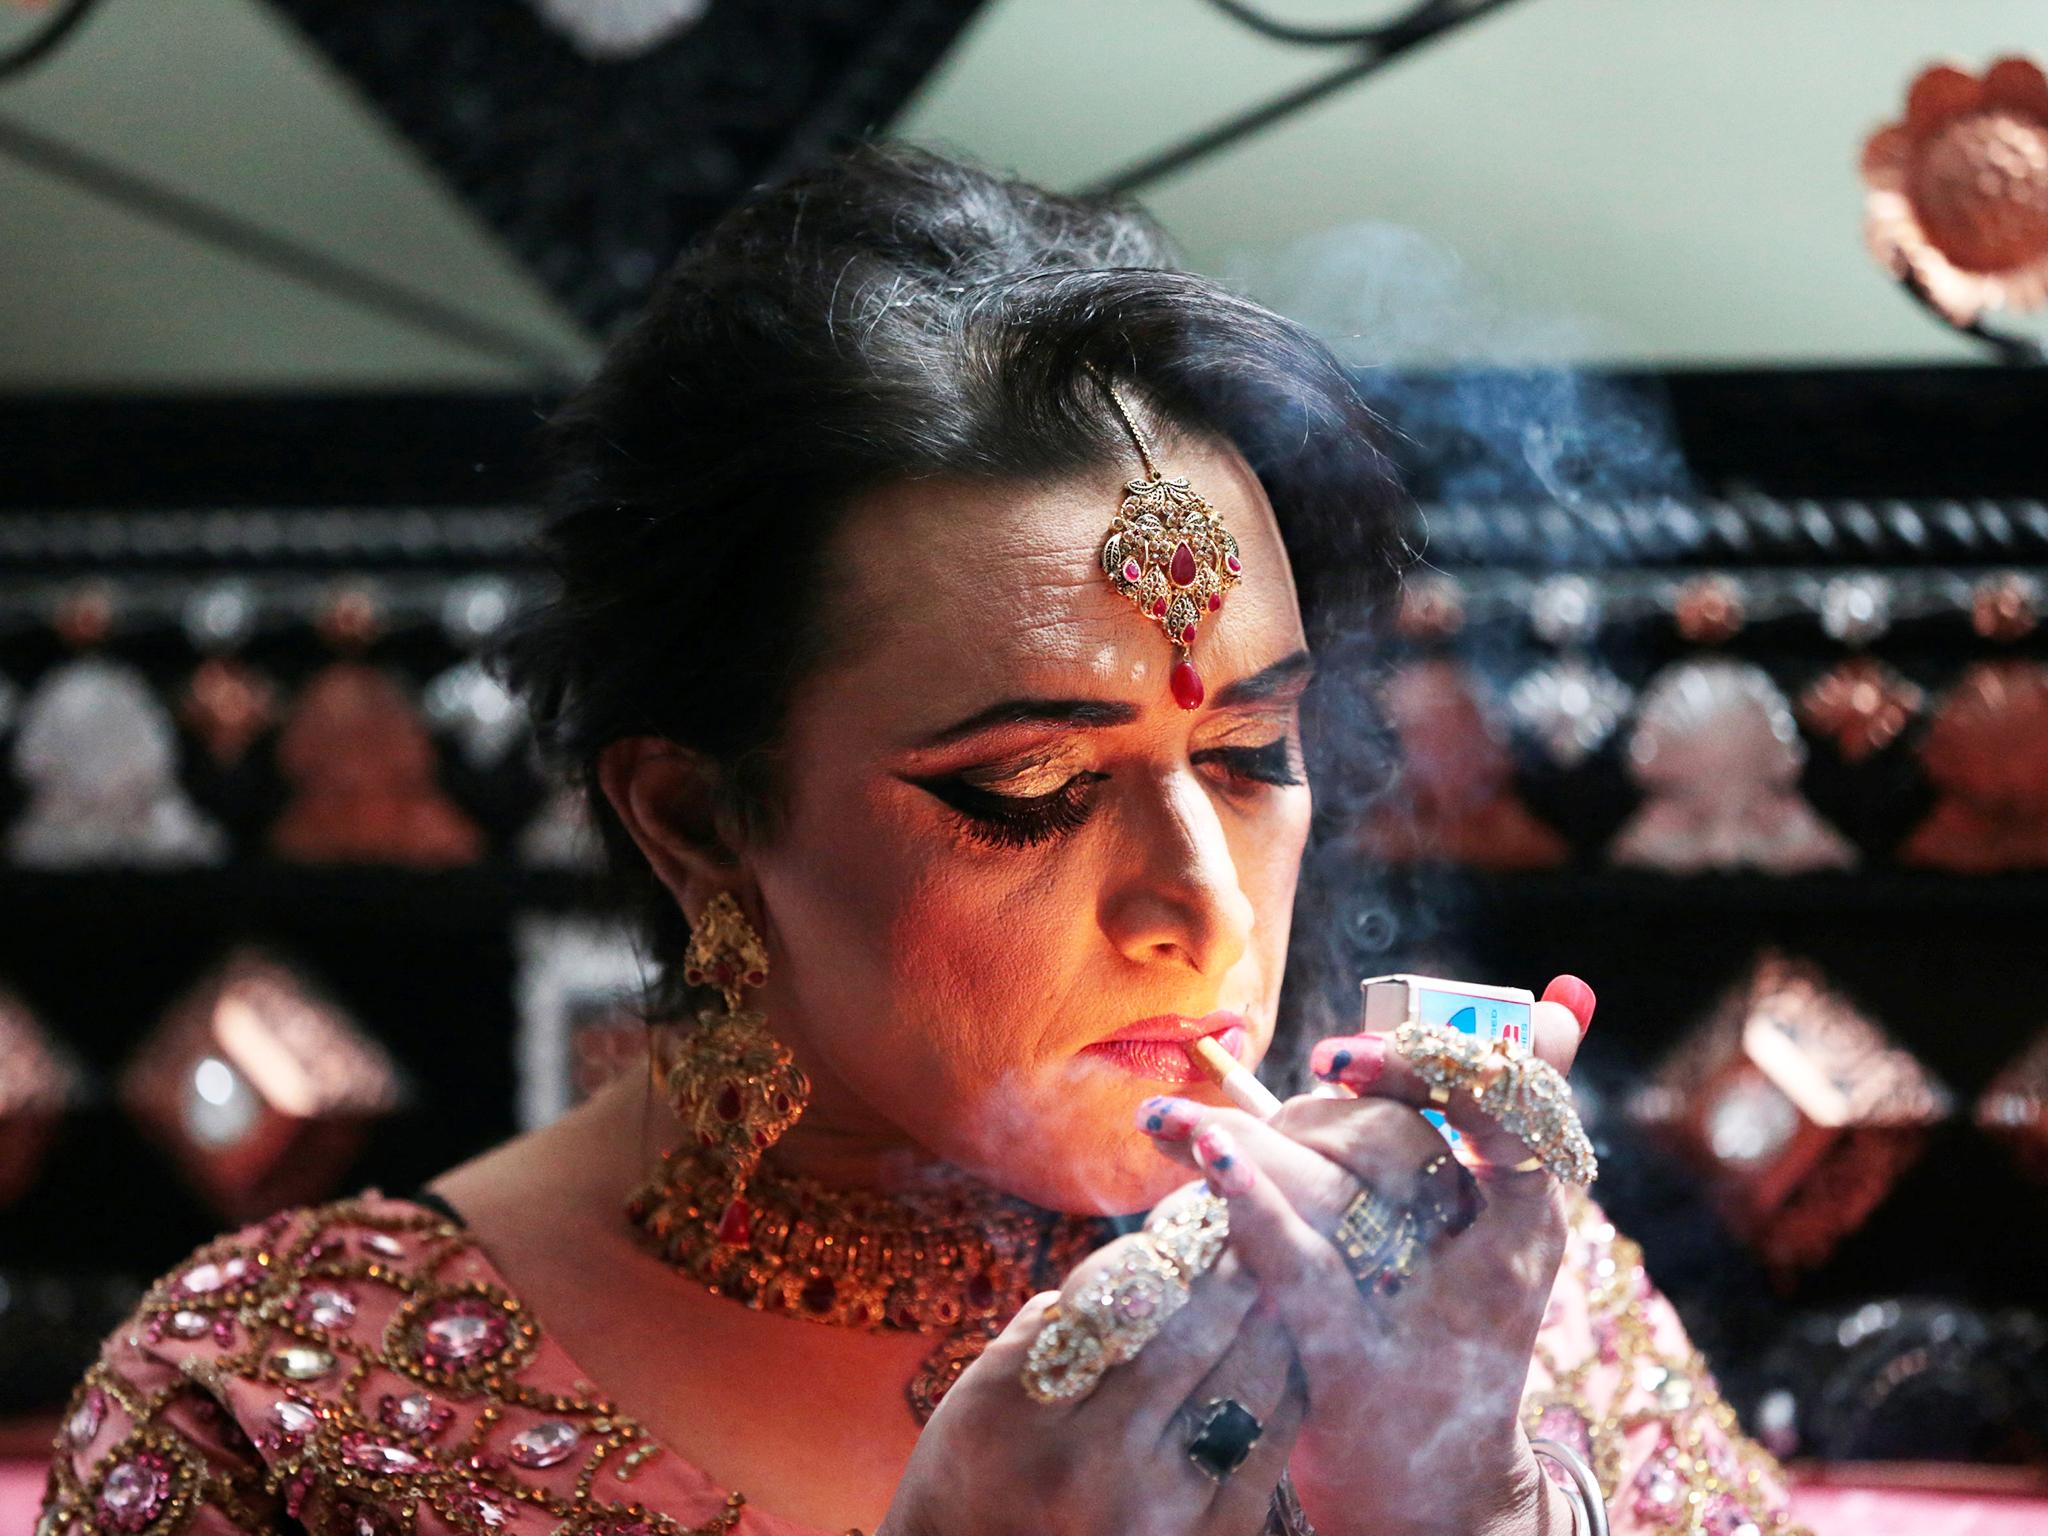 Shakeela, a member of the transgender community, lights a cigarette as she prepares for her party in Peshawar, Pakistan